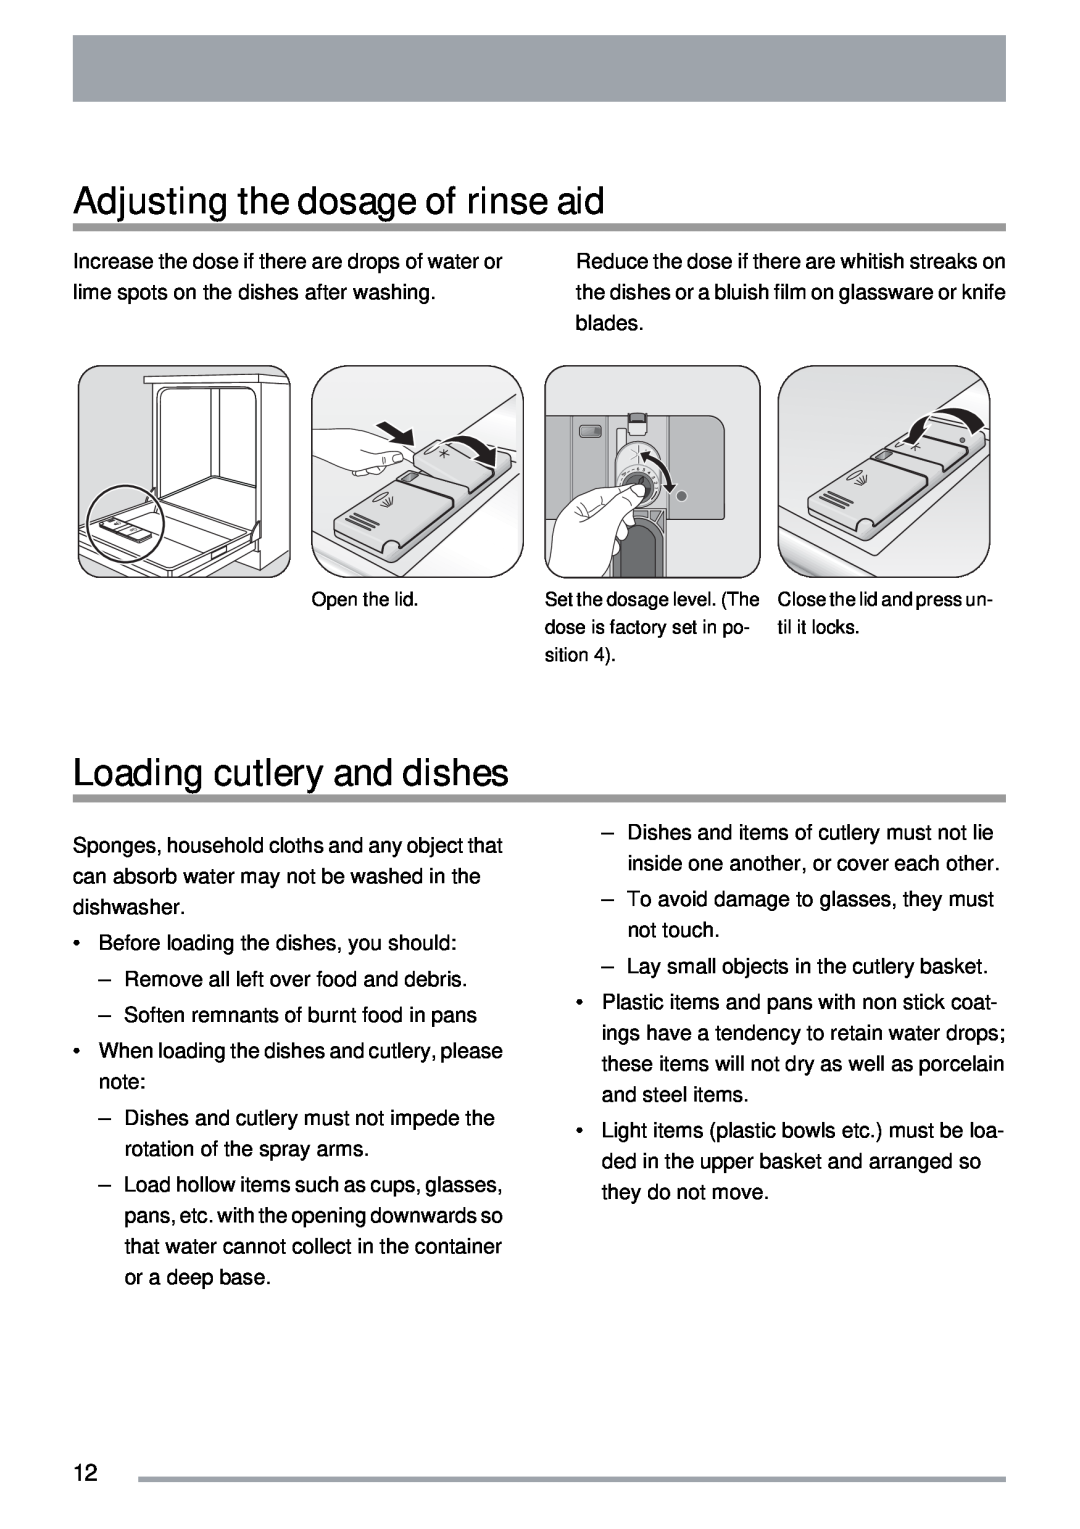 Zanussi ZDT40 user manual Adjusting the dosage of rinse aid, Loading cutlery and dishes 